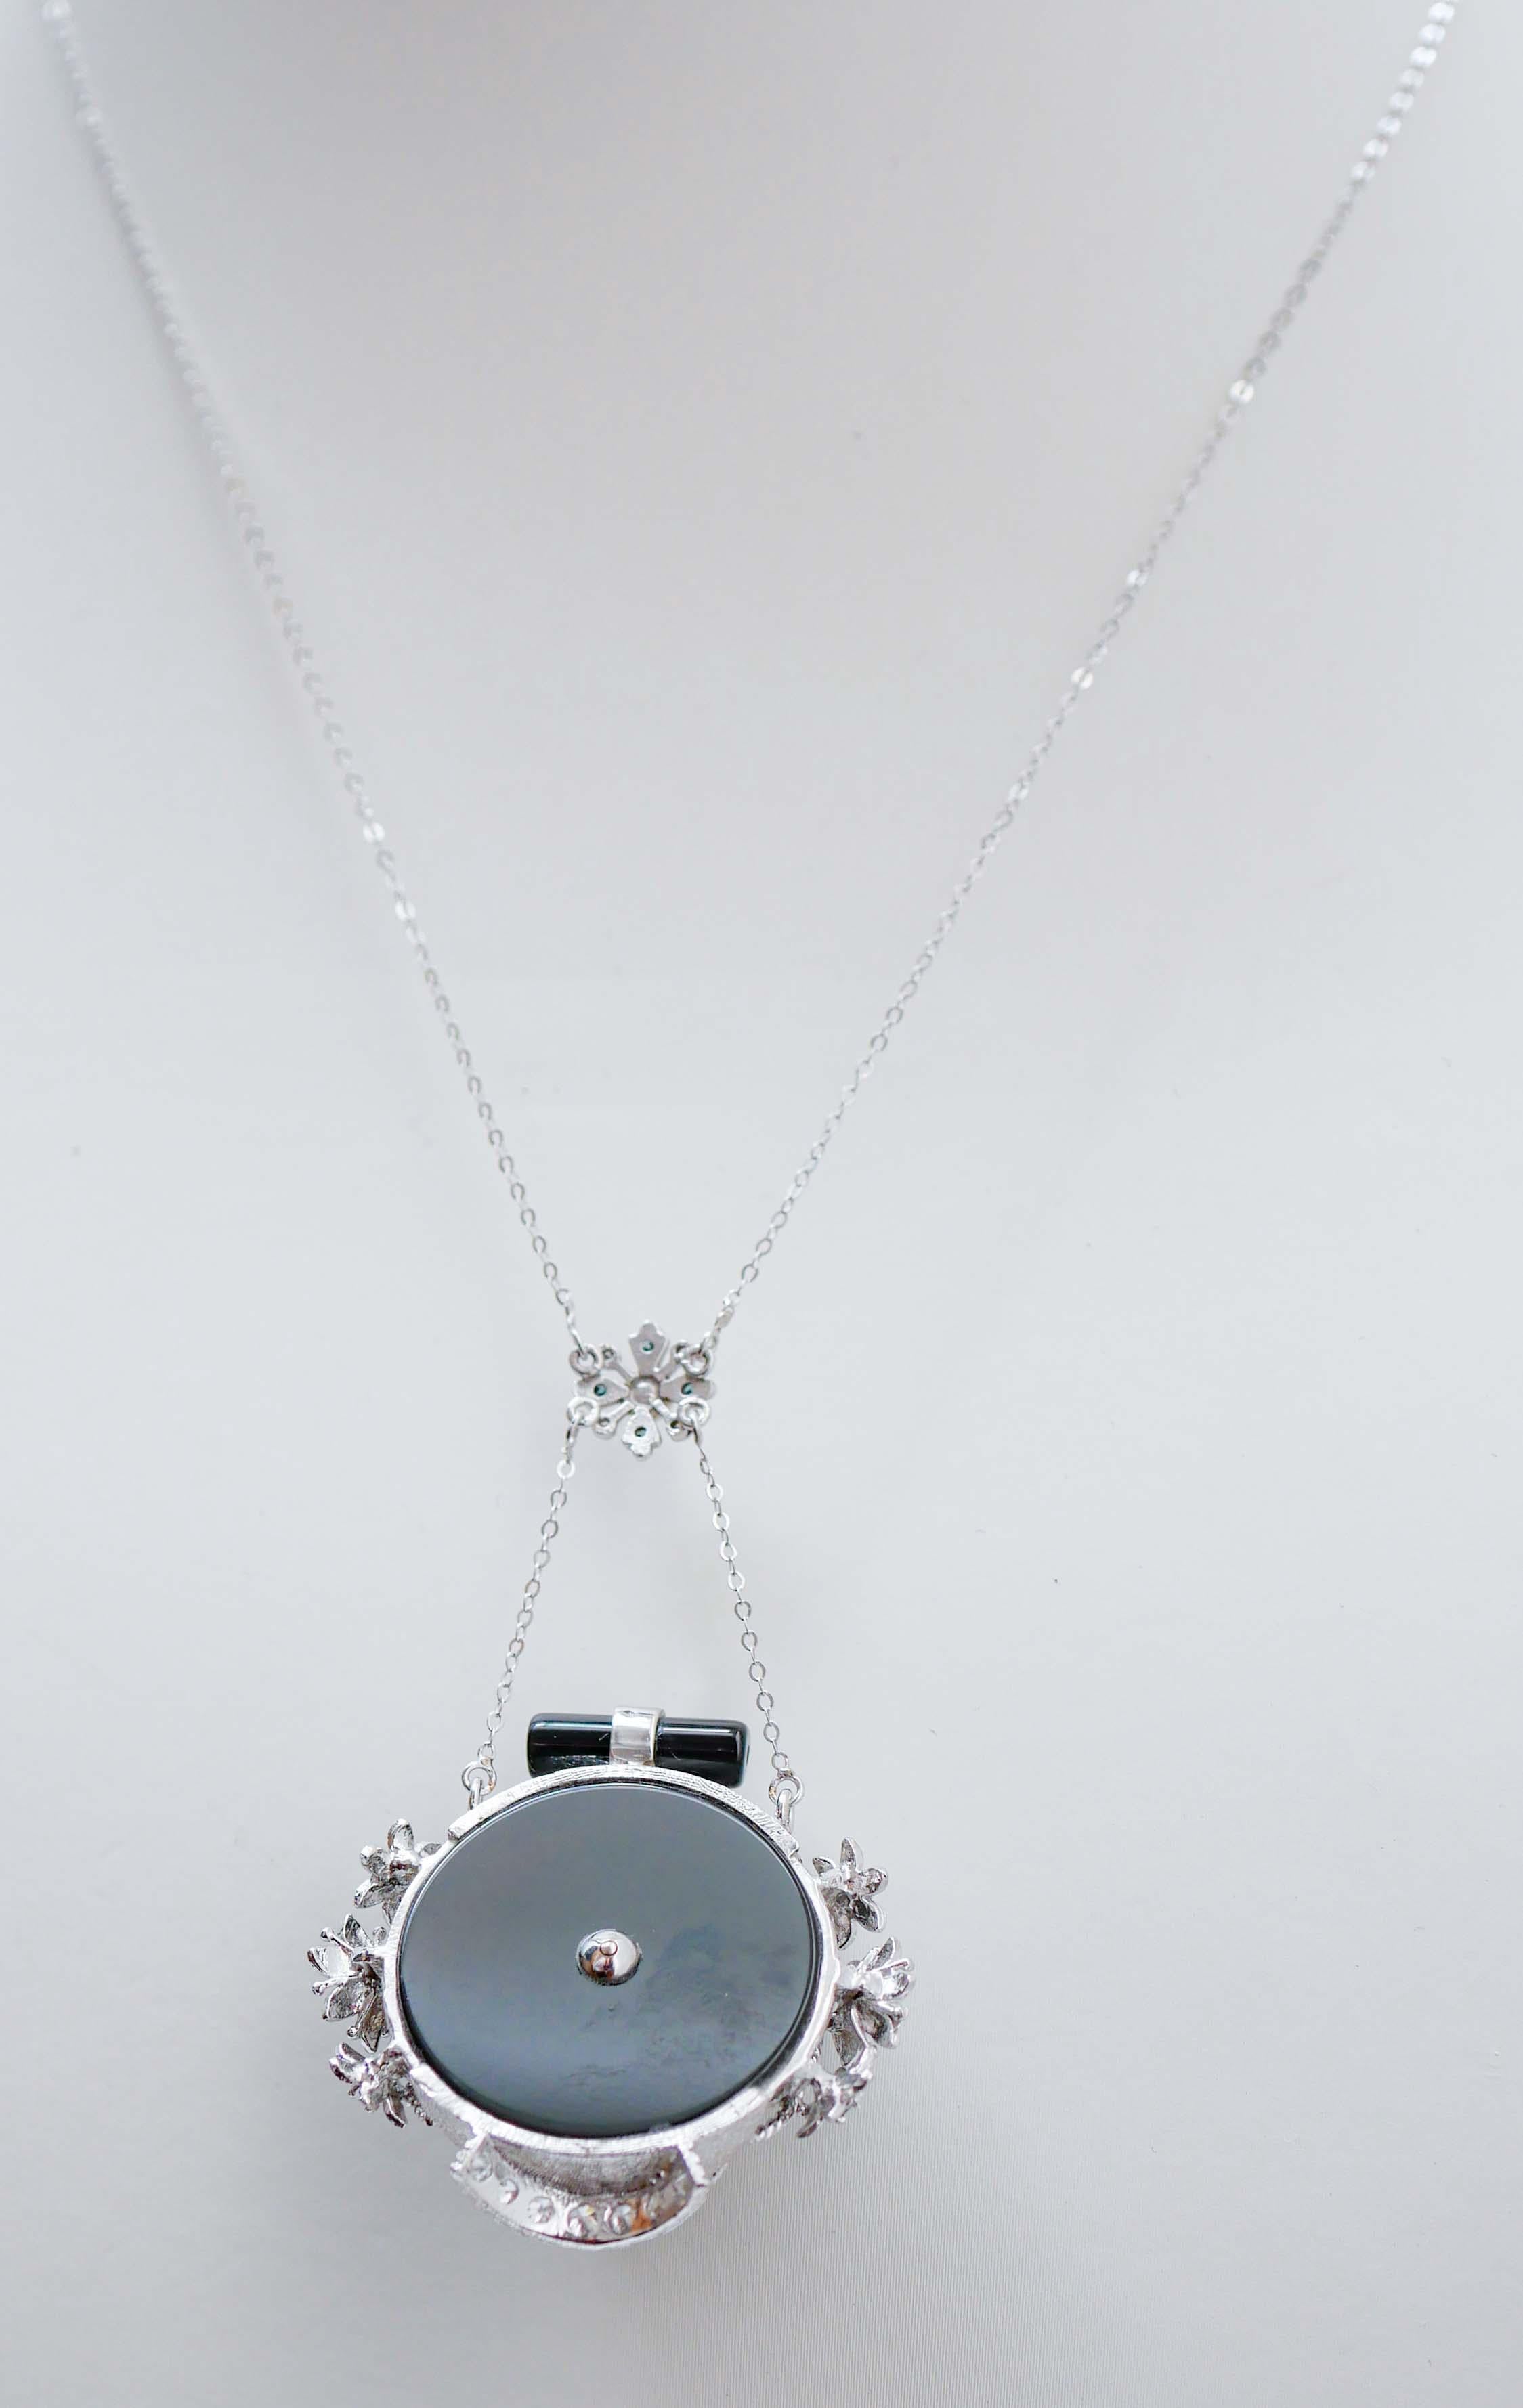 Mixed Cut White and Fancy Diamonds, Onyx, White Stones, 14 Kt  Gold Pendant Necklace. For Sale